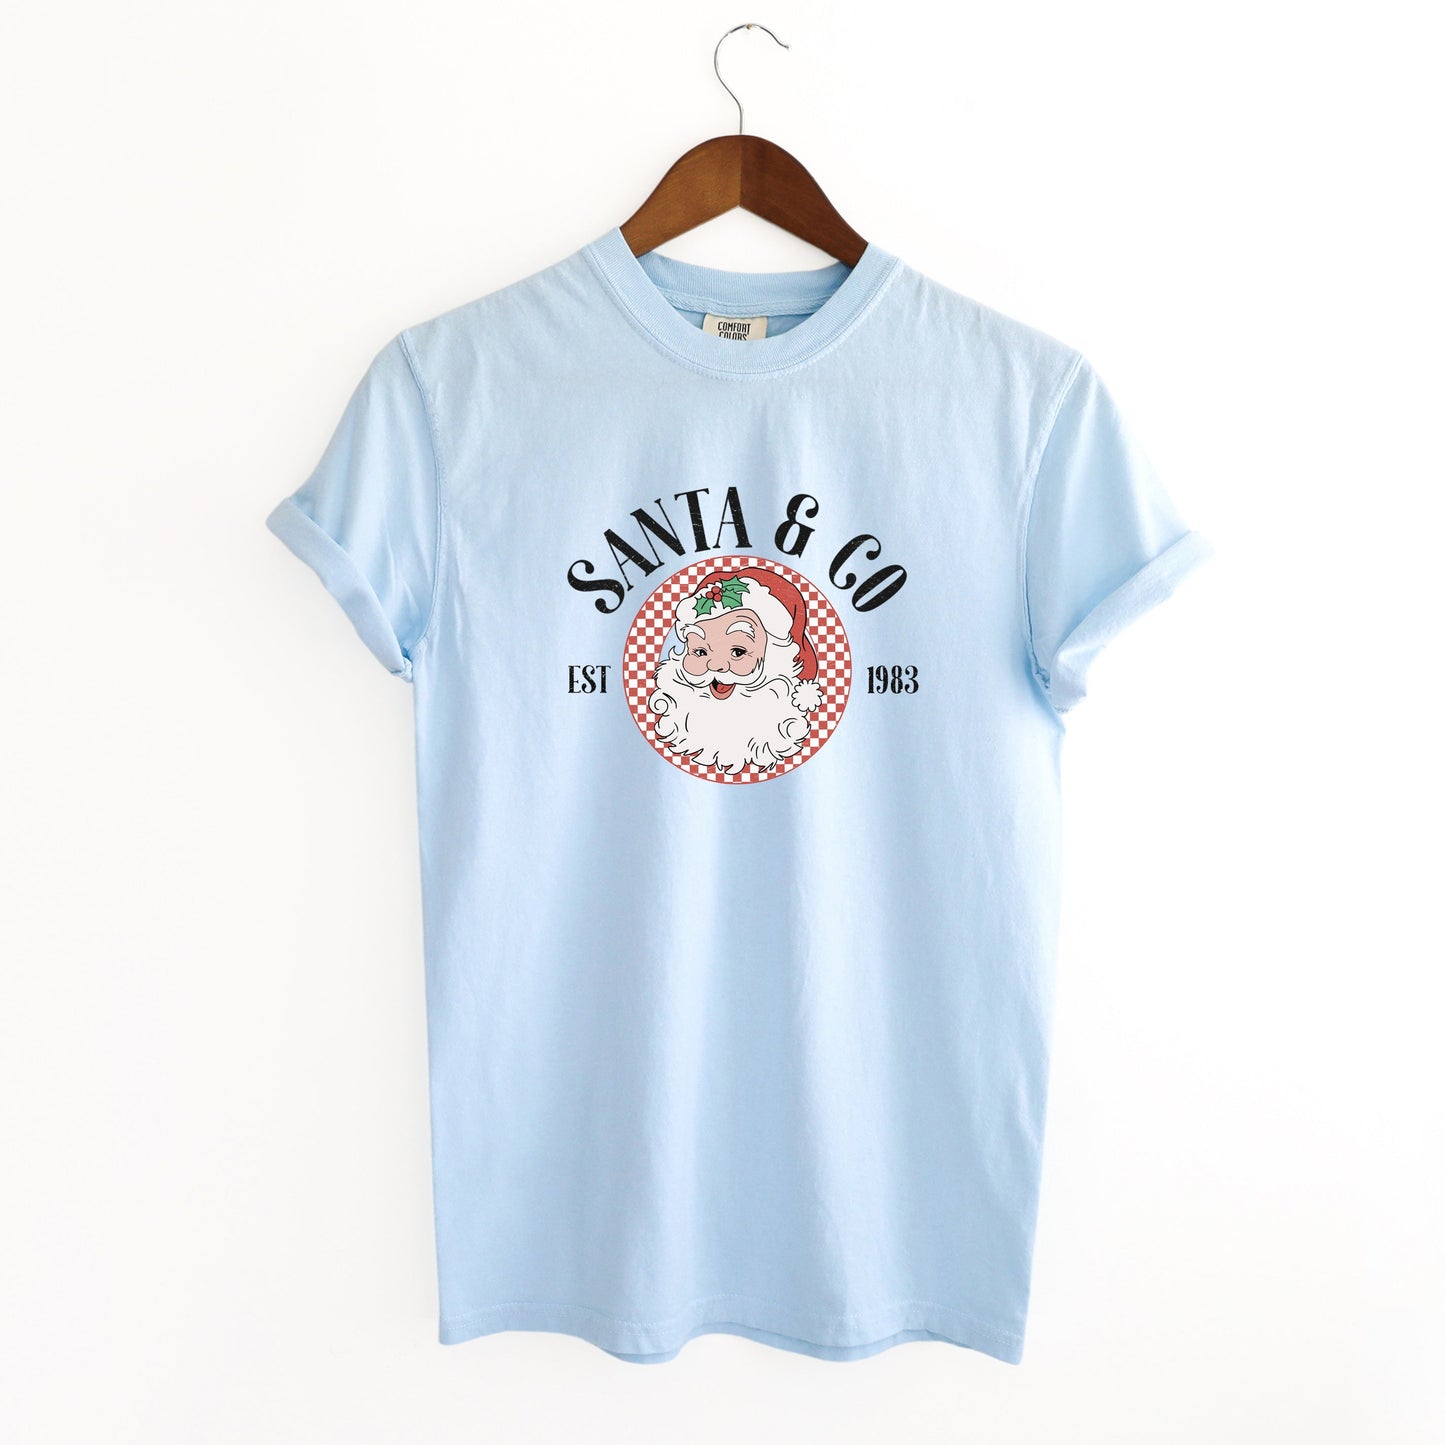 Santa and Co | Garment Dyed Tee